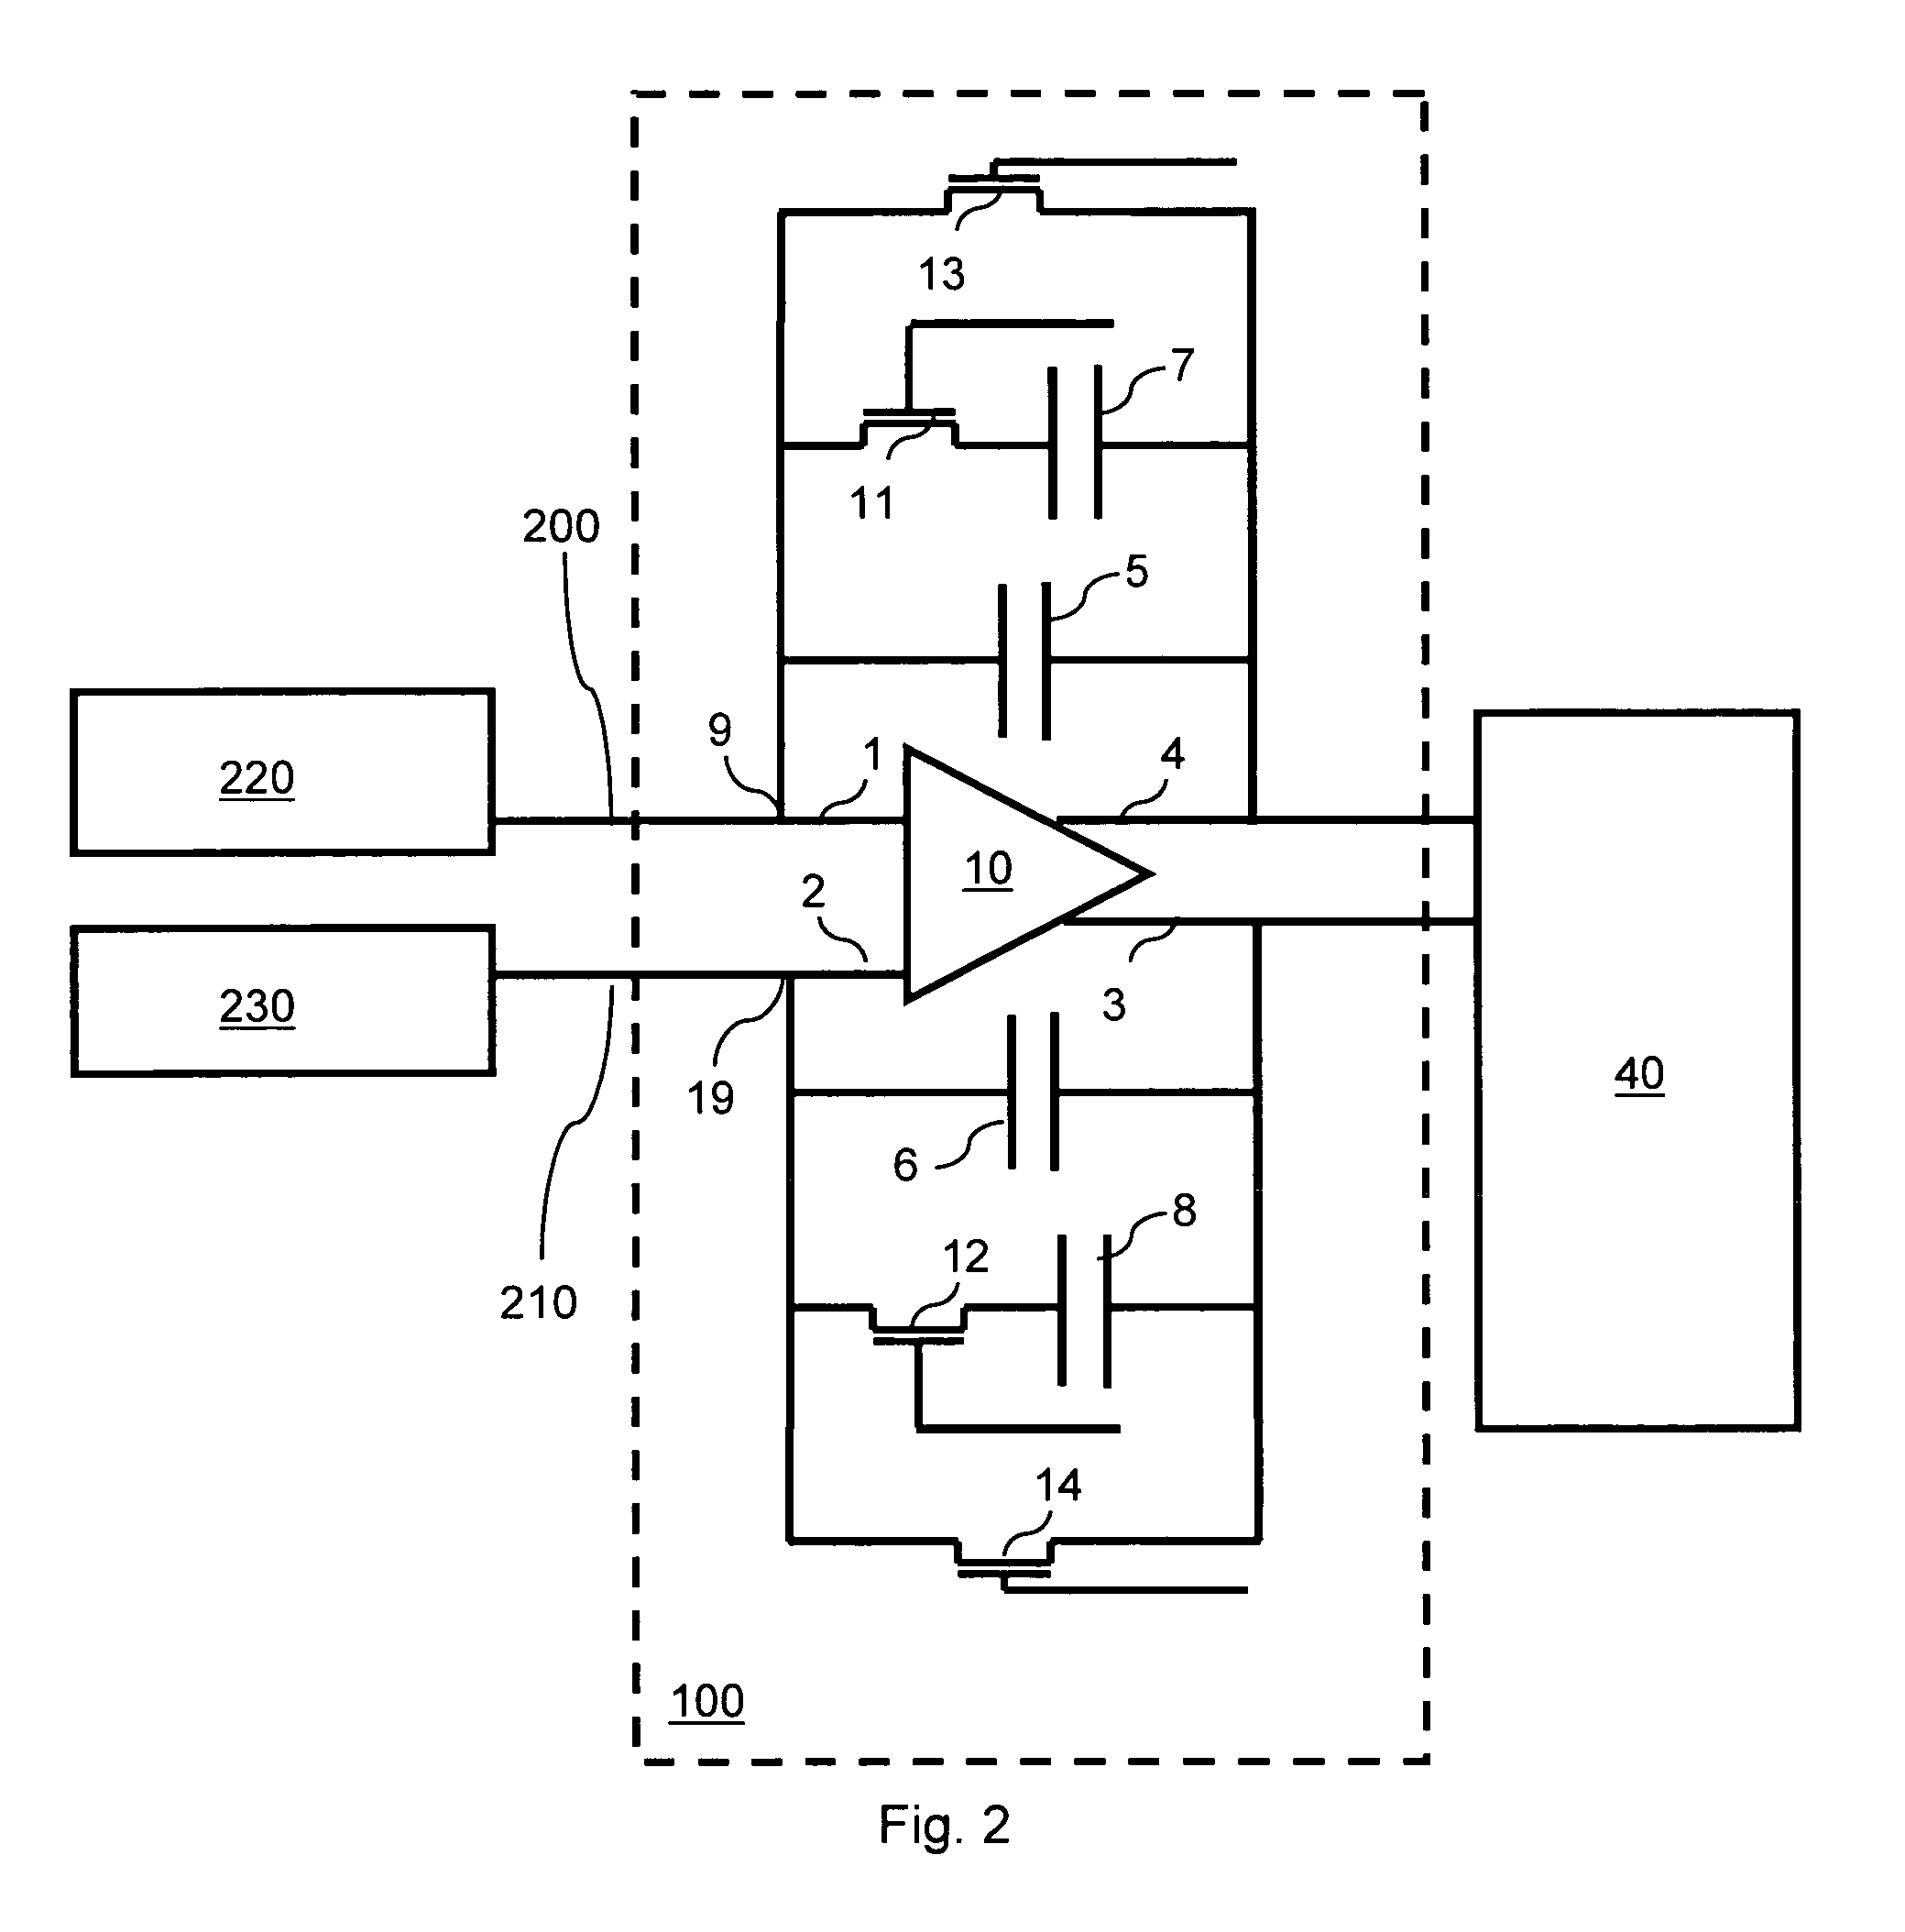 Differential transimpedance amplifier circuit for correlated differential amplification